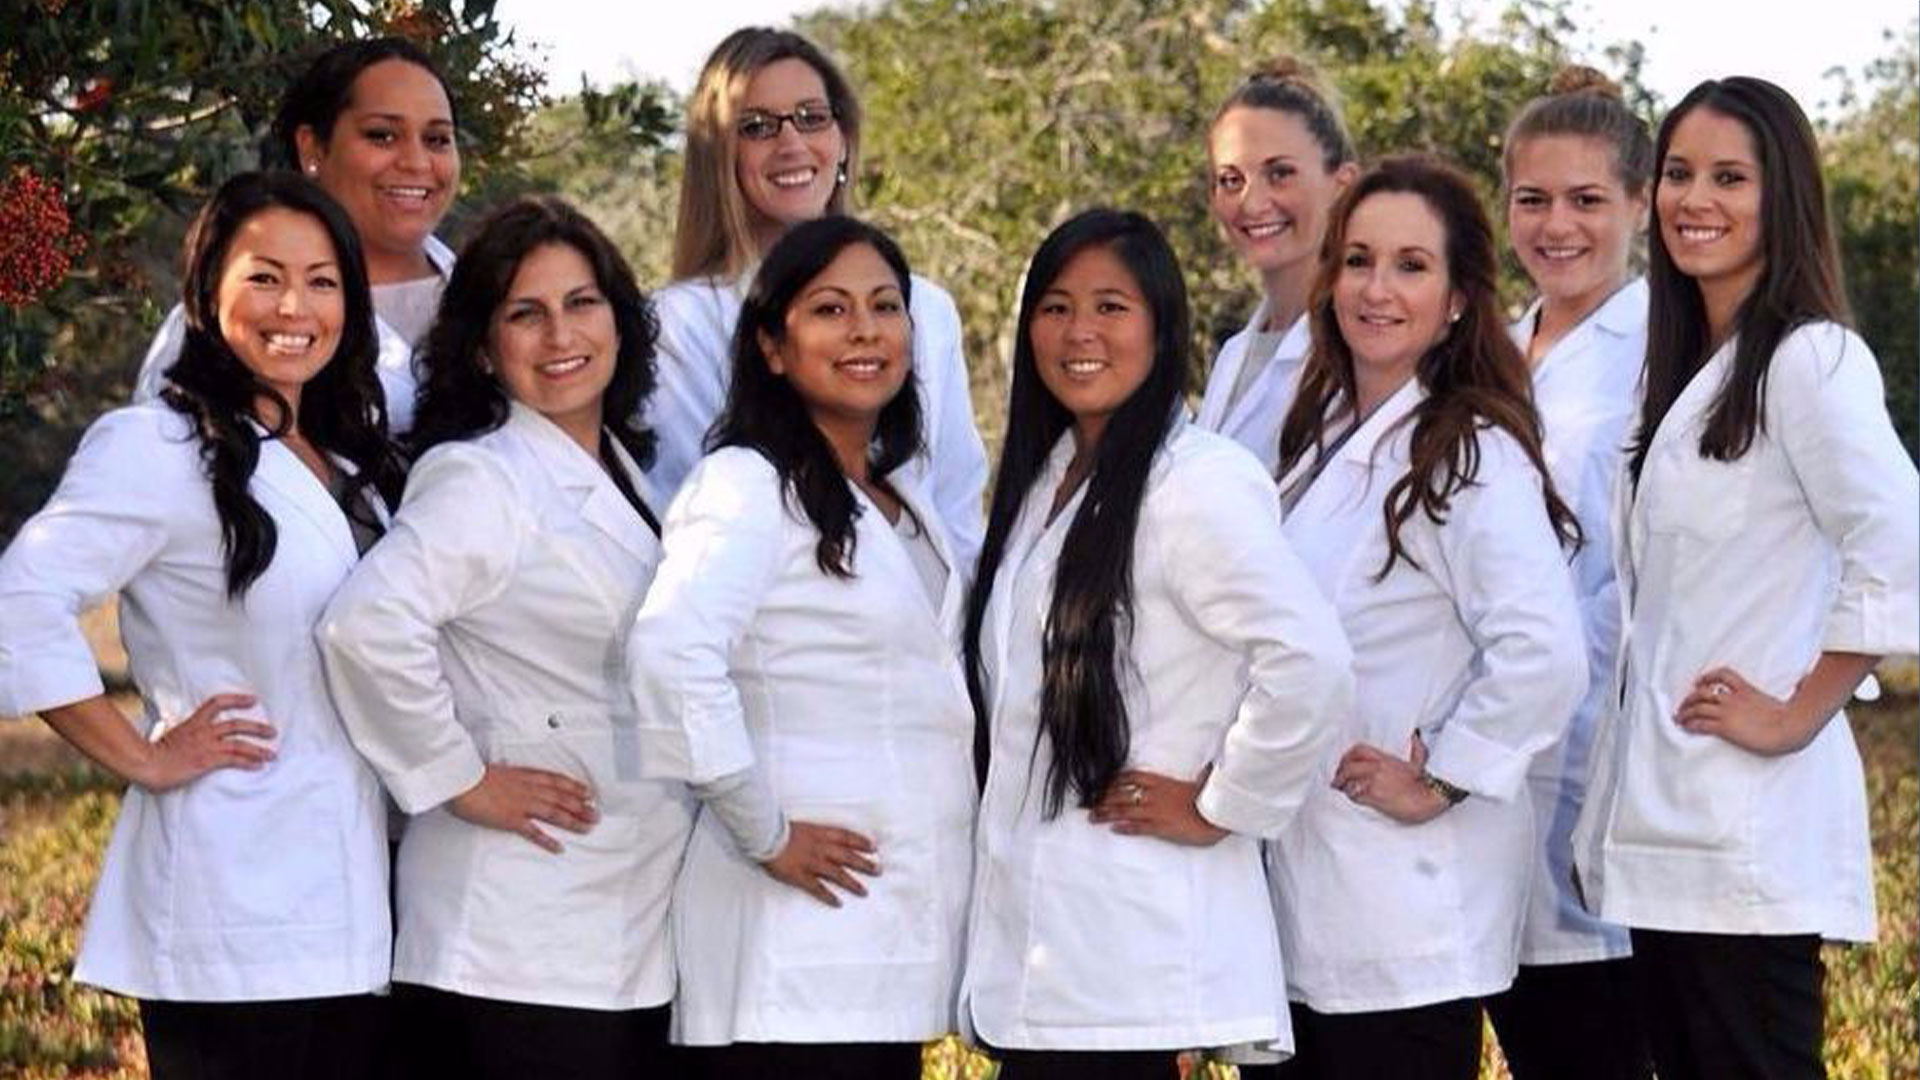 Photo: Students in the nursing program wearing white coats and posing